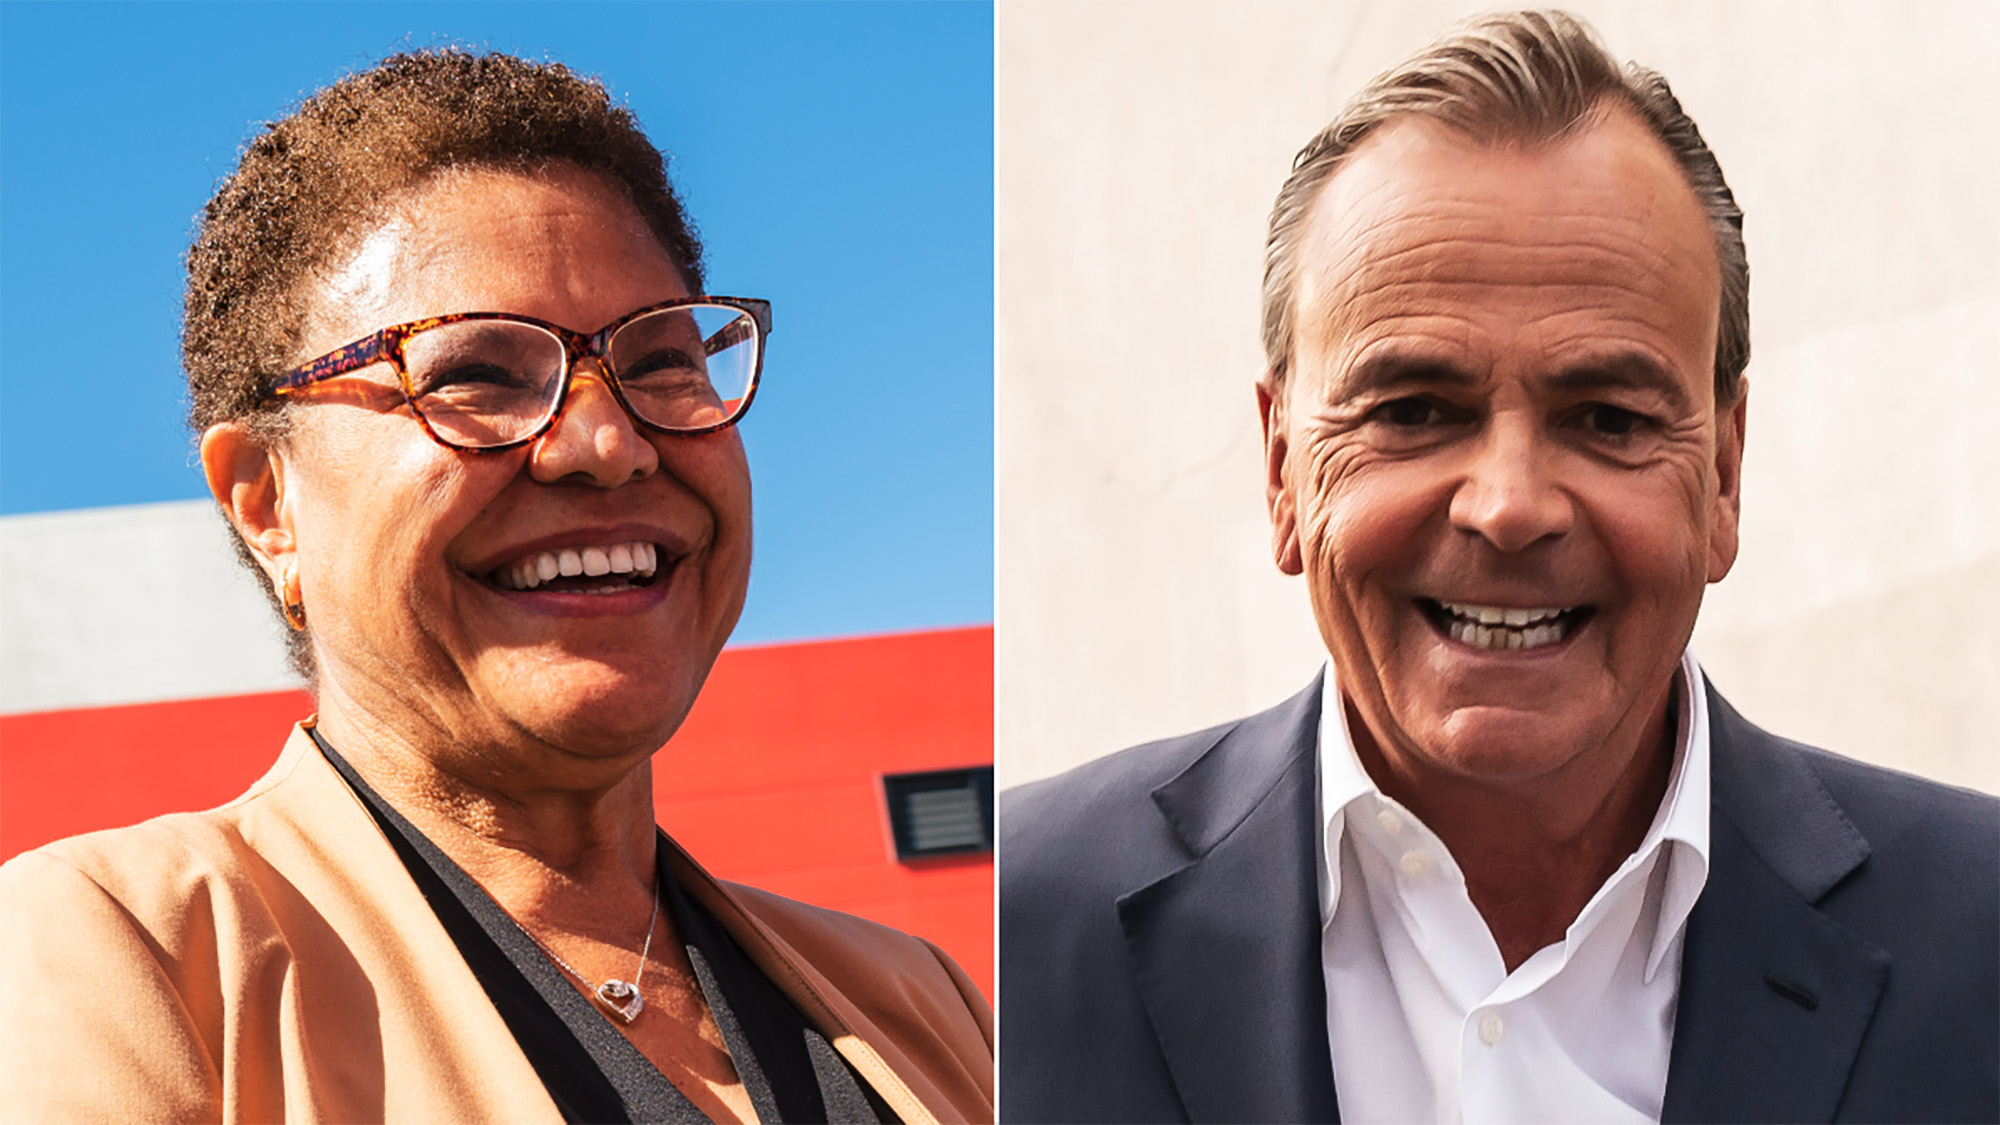 Mayoral candidates Karen Bass and Rick Caruso campaign recently in Los Angeles. 